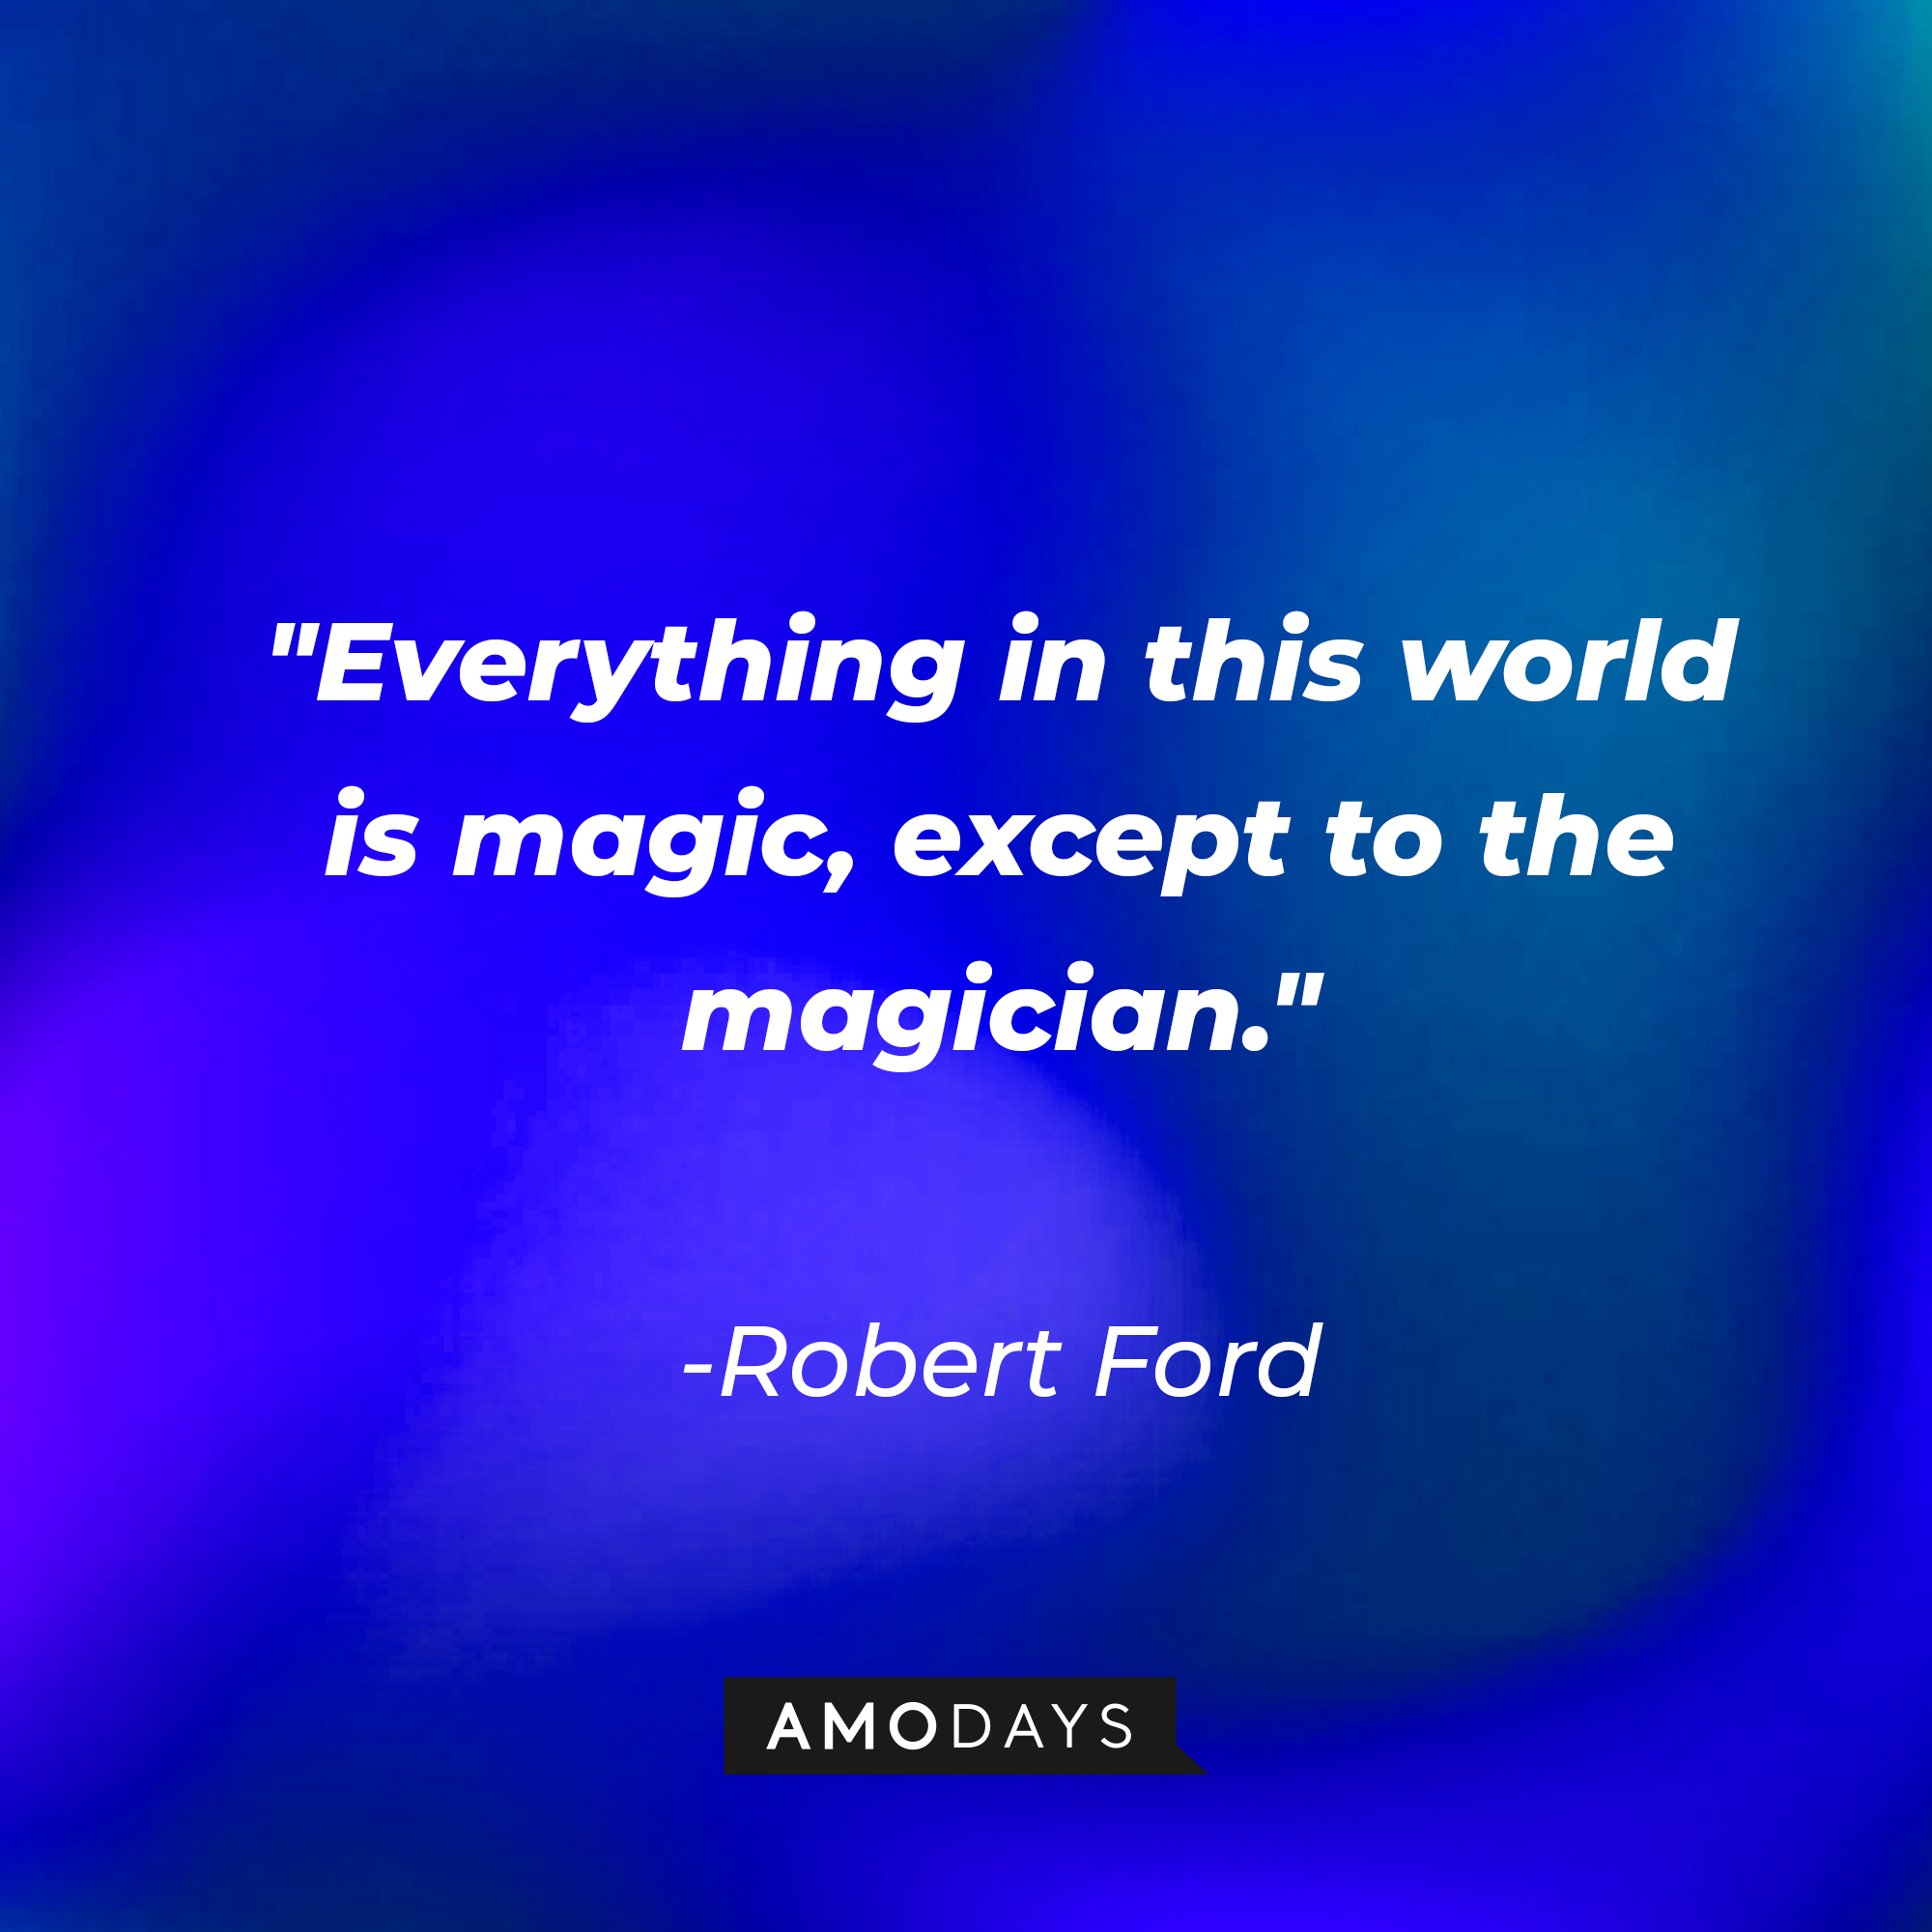 Robert Ford's quote: "Everything in this world is magic, except to the magician." | Source: AmoDays